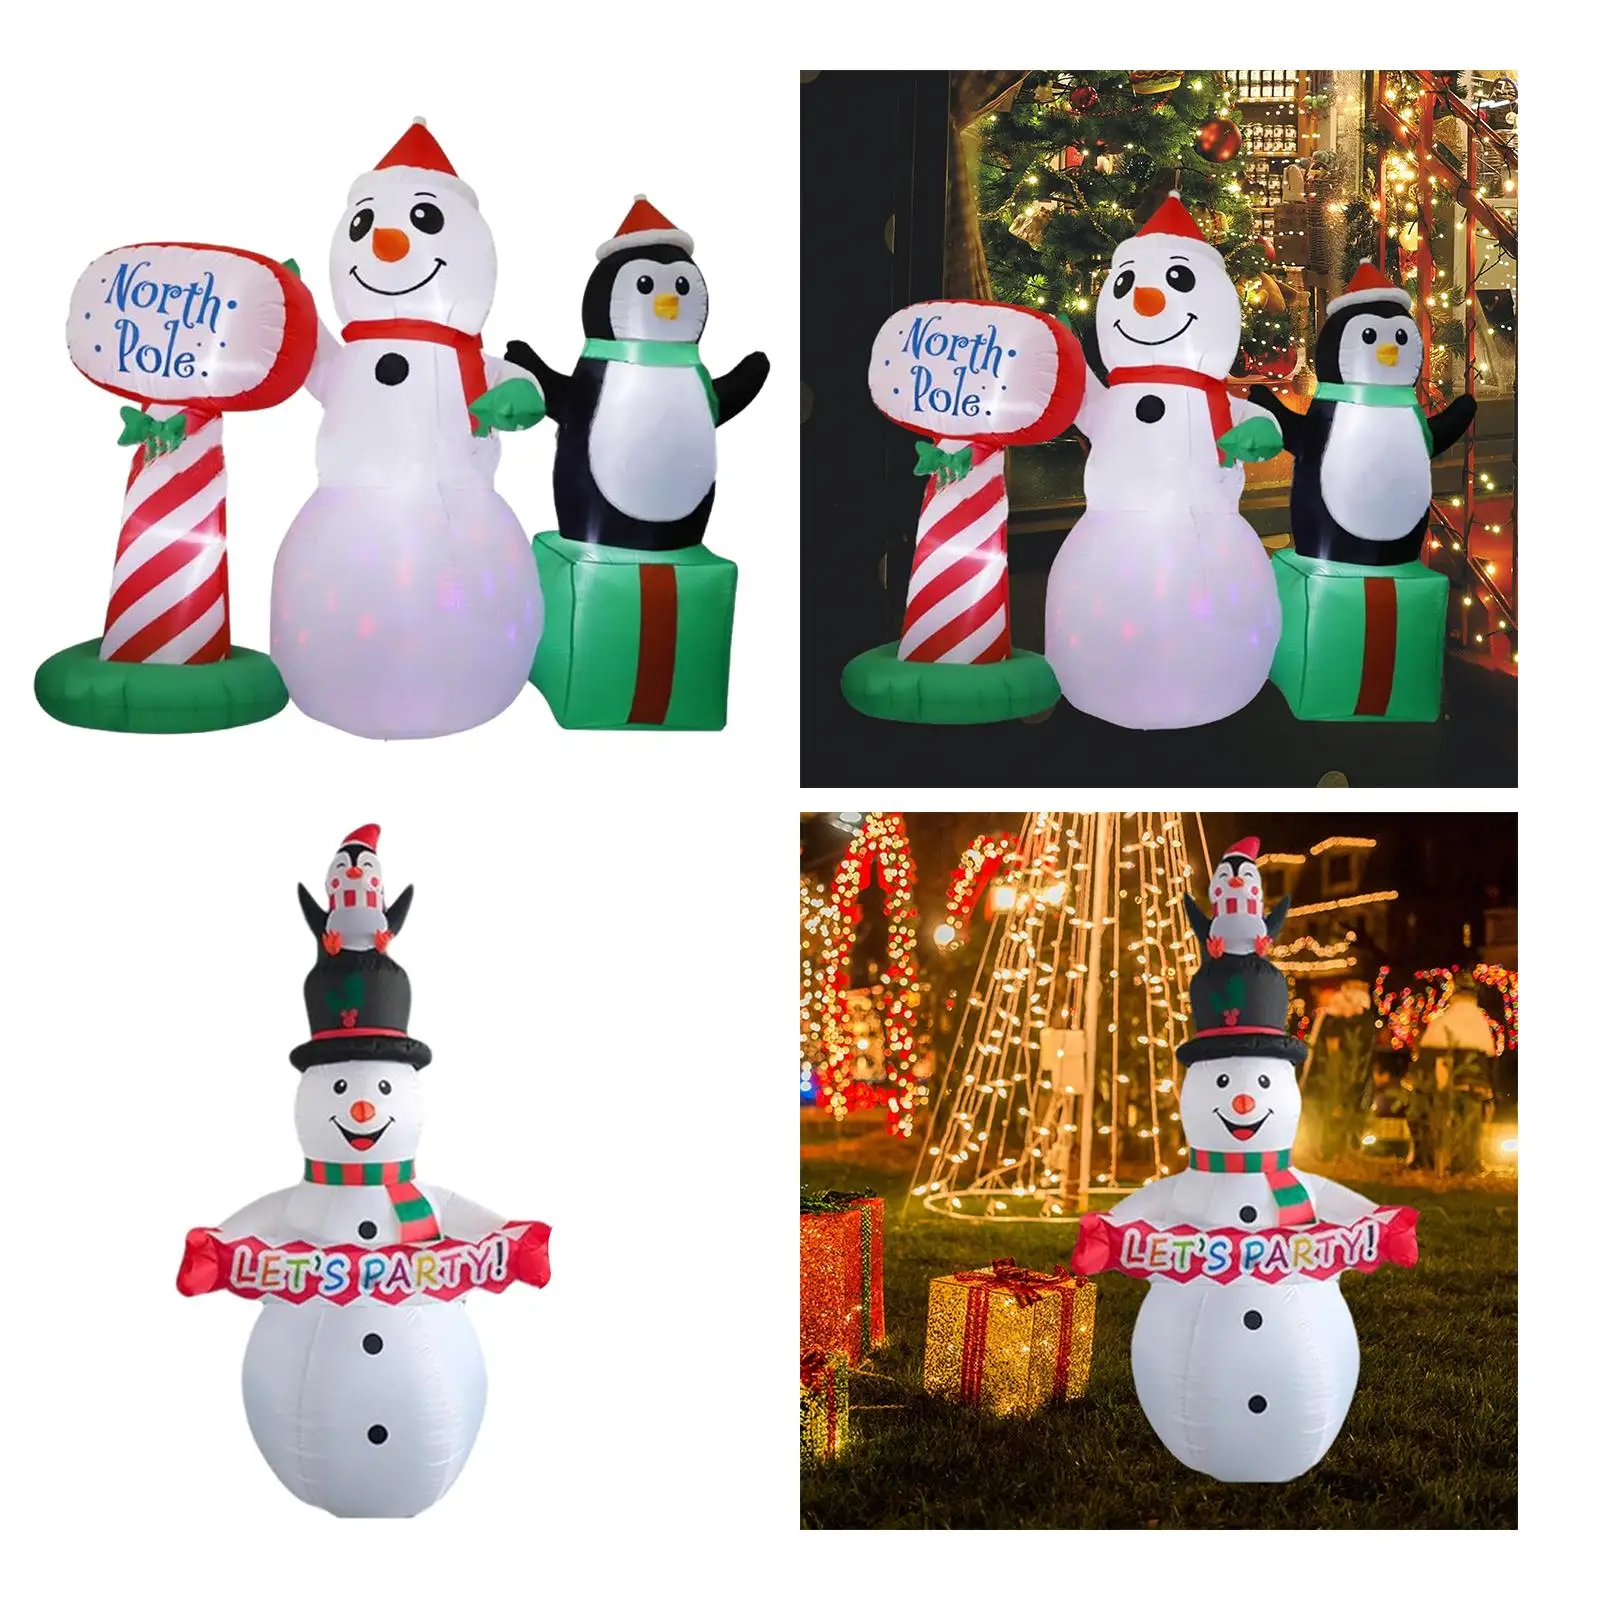 Blow up Snow Man Funny Props Luminous Ornament Large Christmas Decor Inflatable Snowman for Winter Vacation Lawn Outdoor Garden